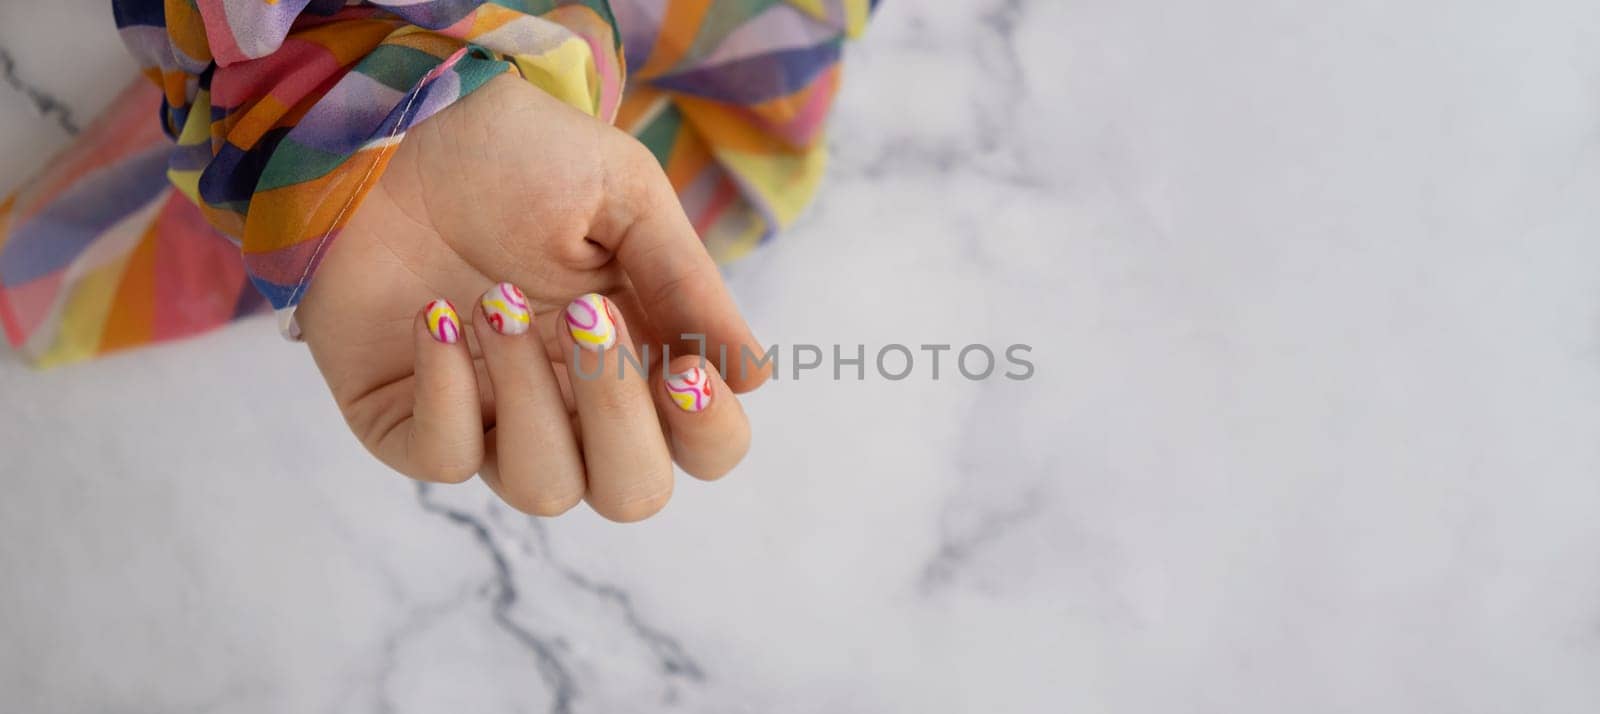 Woman manicured hands, stylish summer colorful nails. Closeup of manicured nails of female hand. Summer style of nail design concept. Beauty by anna_stasiia